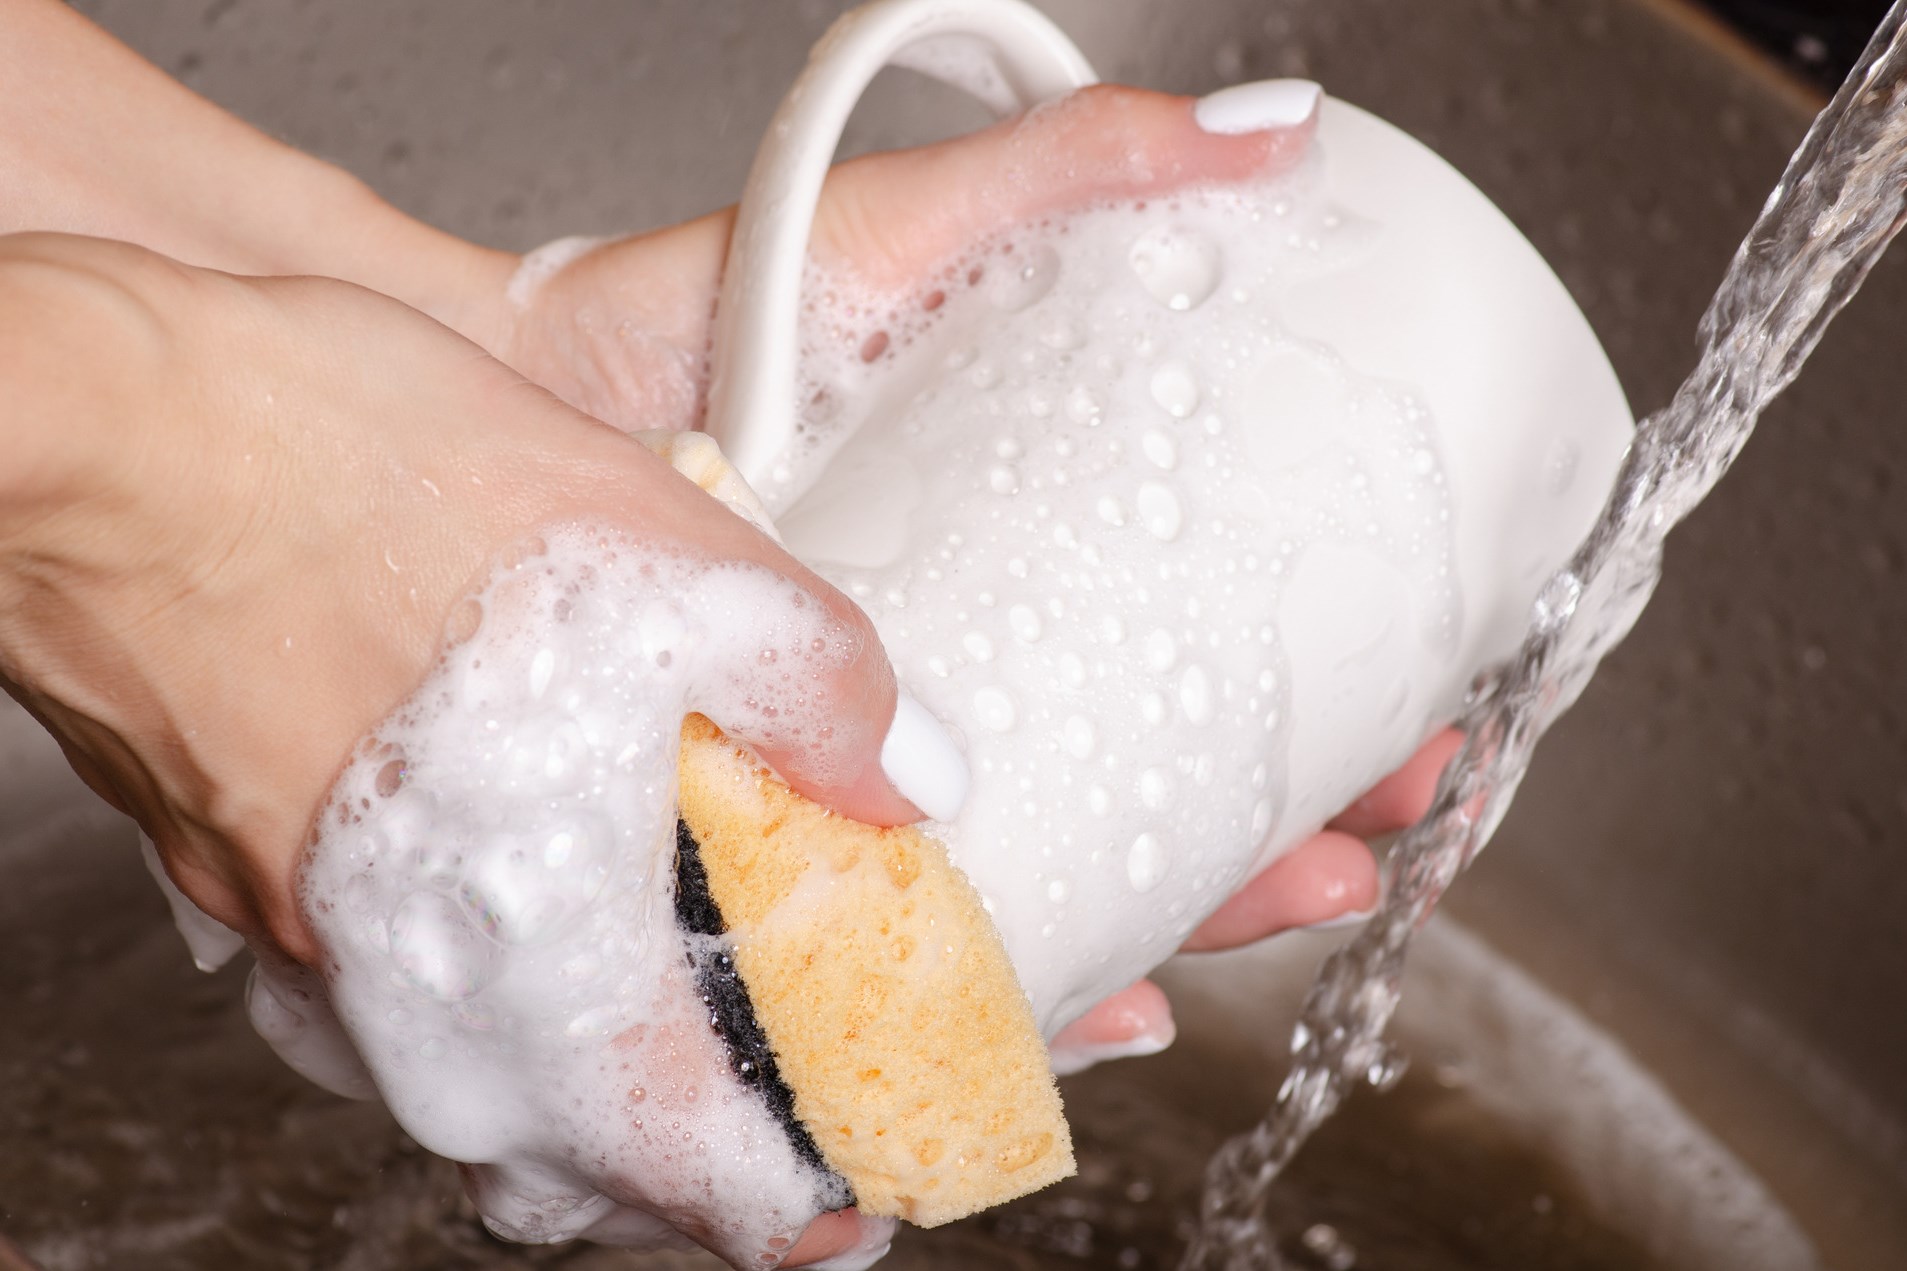 A woman washes a cup with a lot of foam and water.